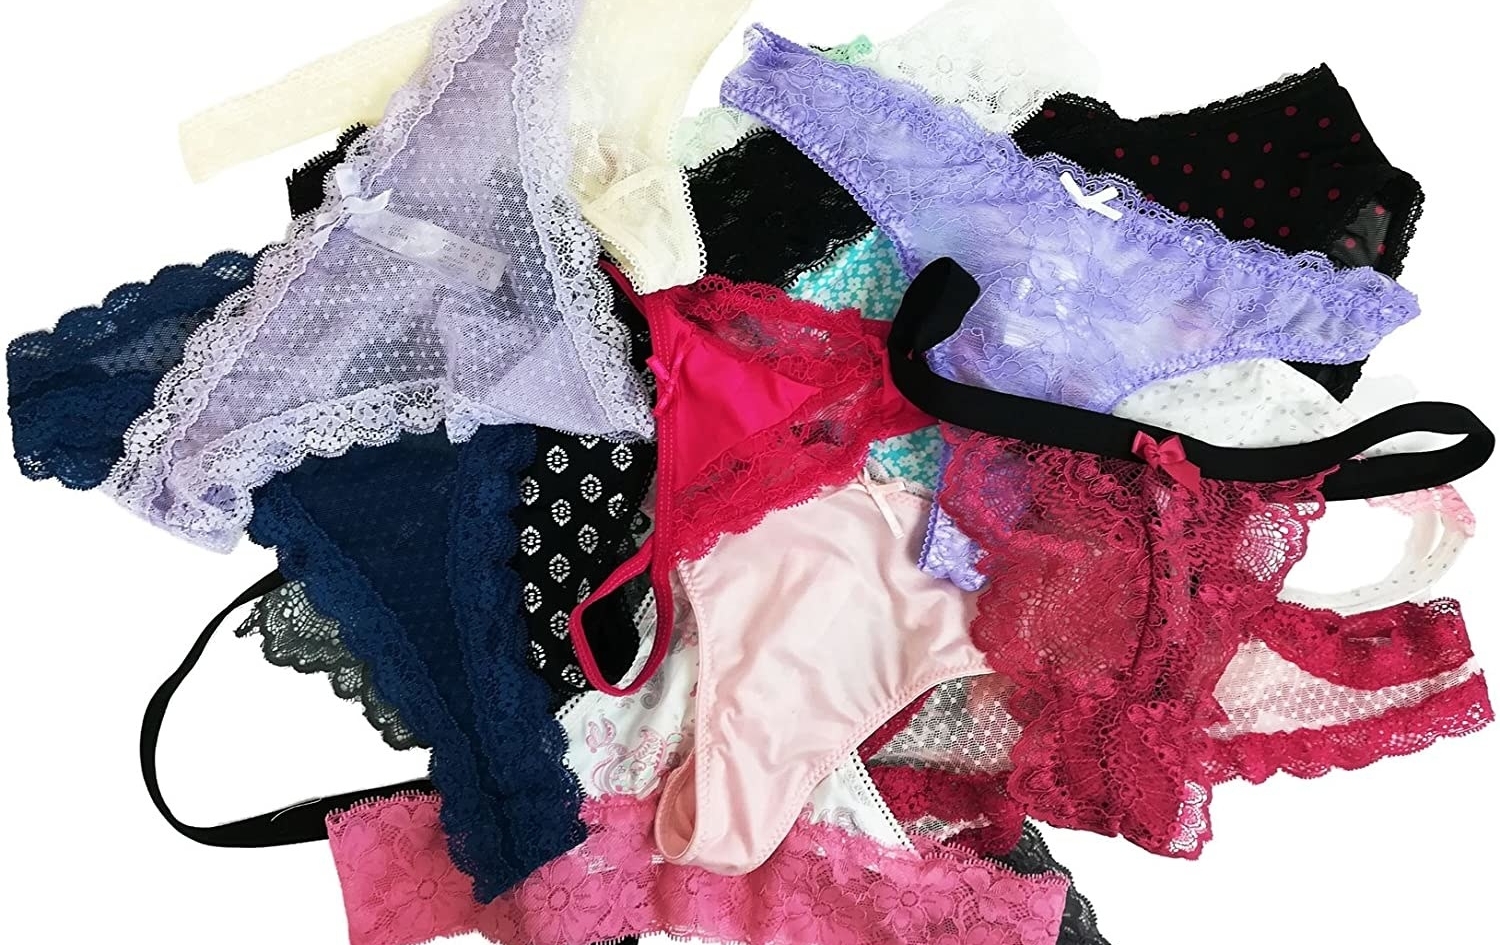 How Many Bras And Panties Should A Woman Have